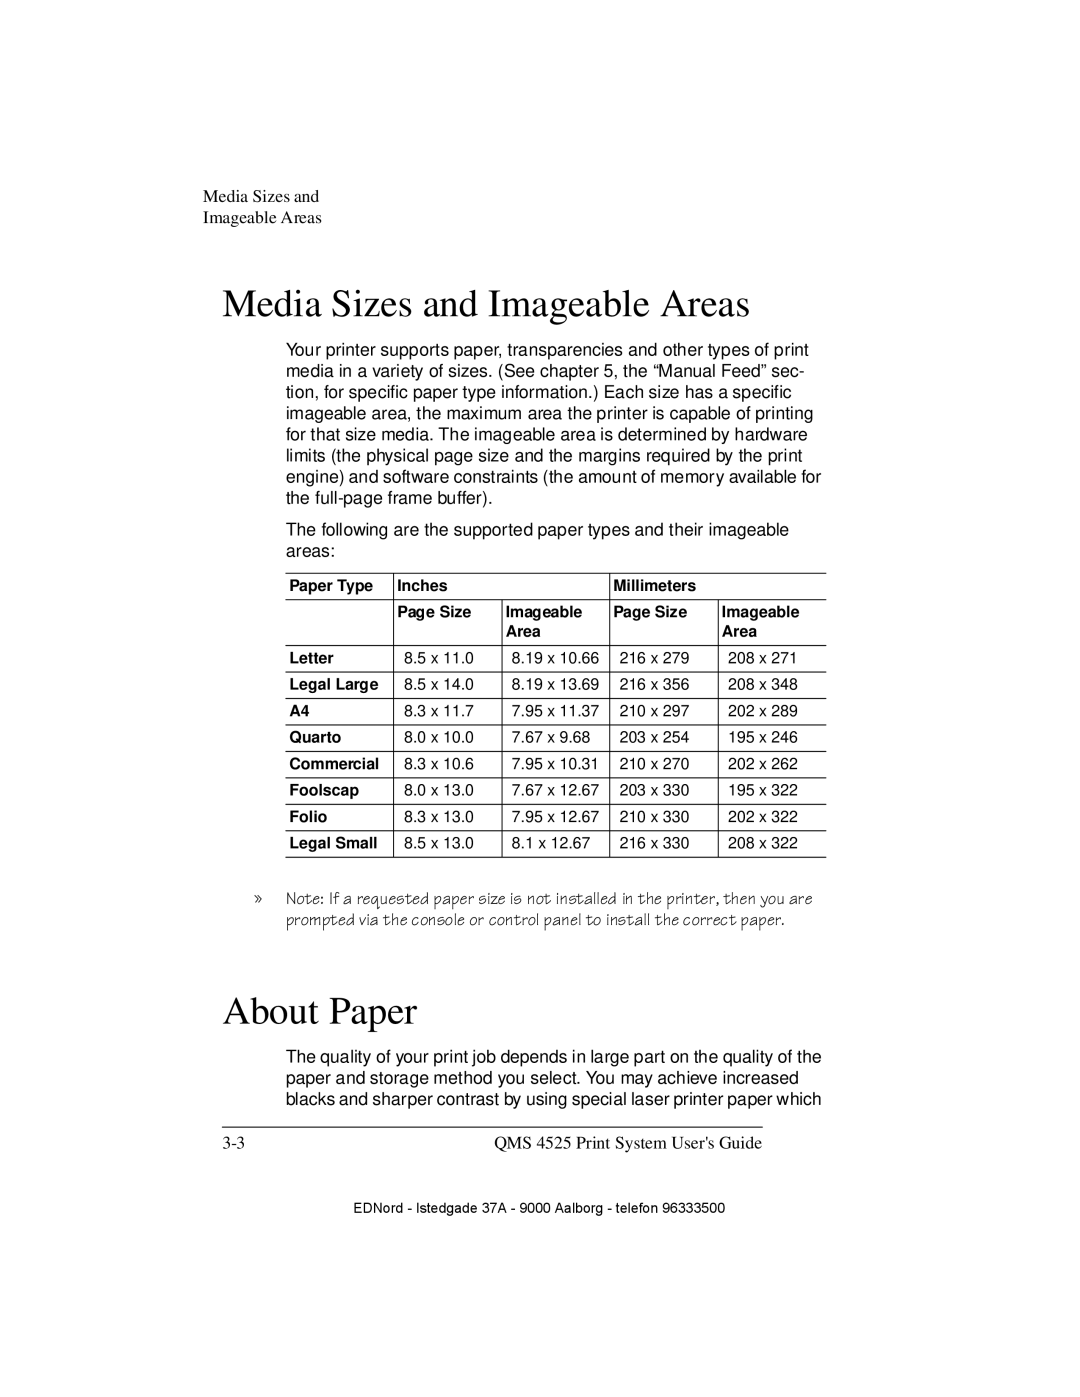 IBM QMS 4525 manual Media Sizes and Imageable Areas, About Paper 